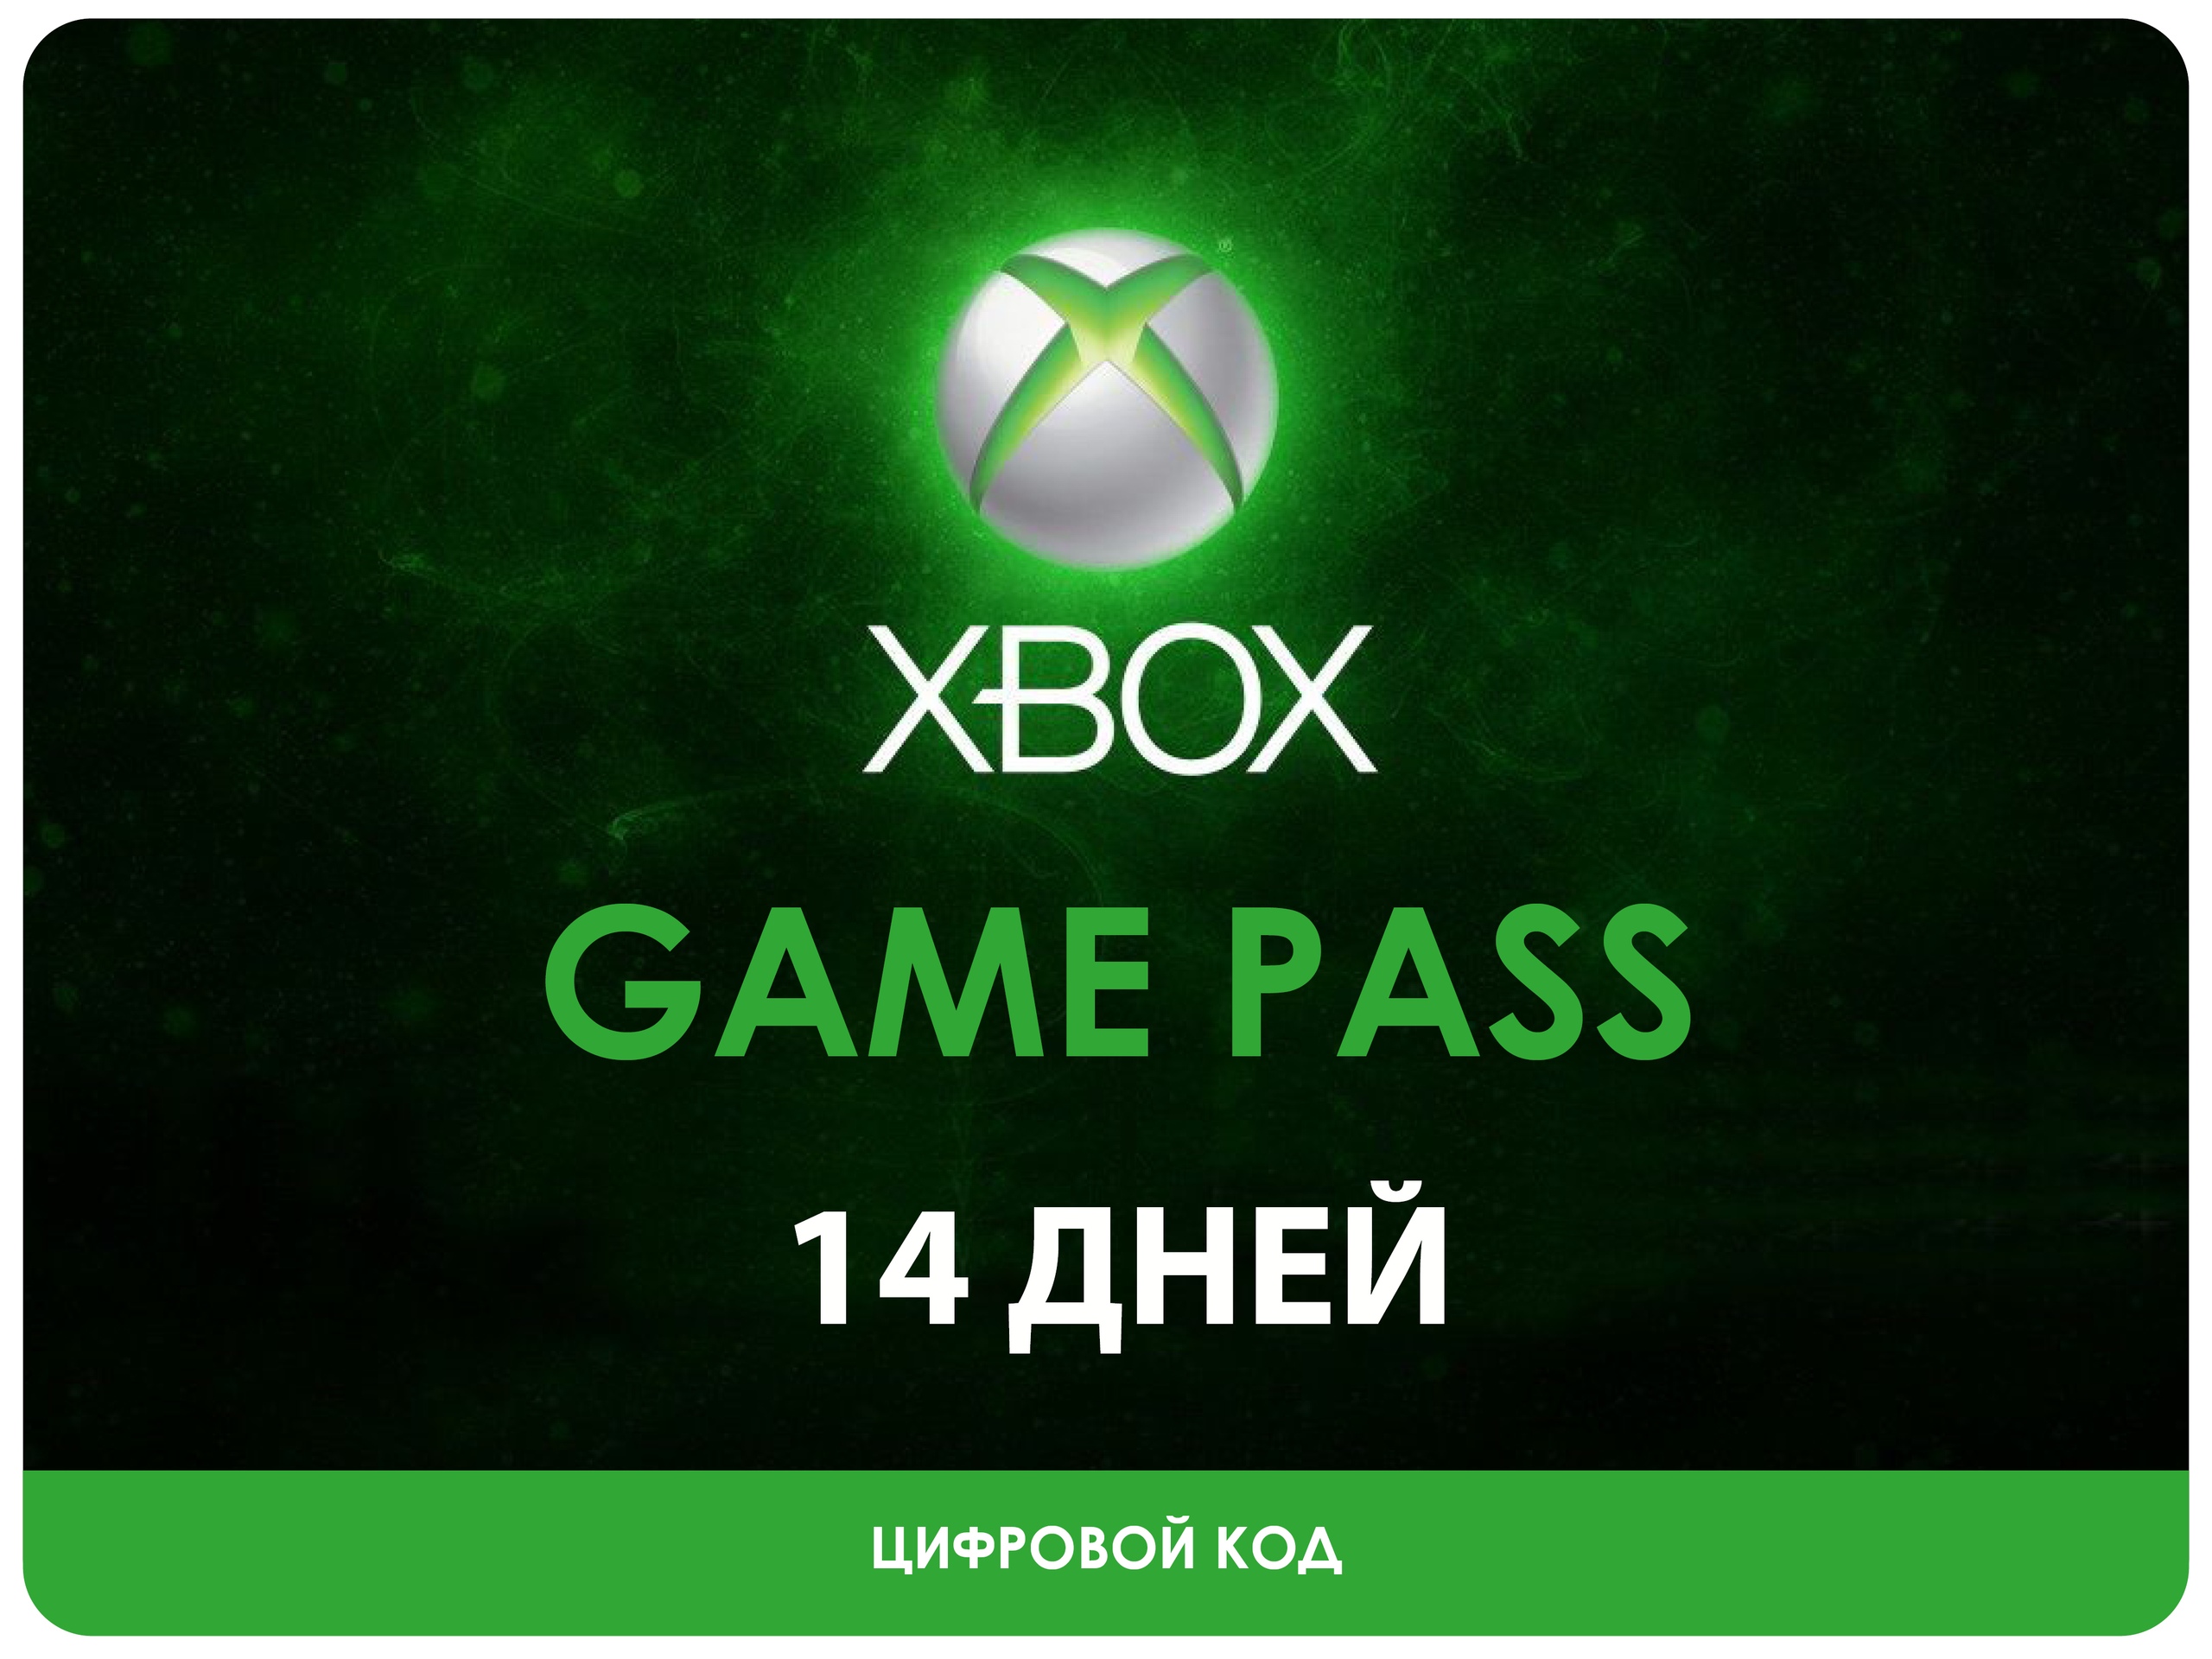 X games pass. Xbox game Pass Ultimate. Xbox one game Pass Ultimate. Xbox game Pass Ultimate 2. Xbox game Pass Ultimate EA Play.